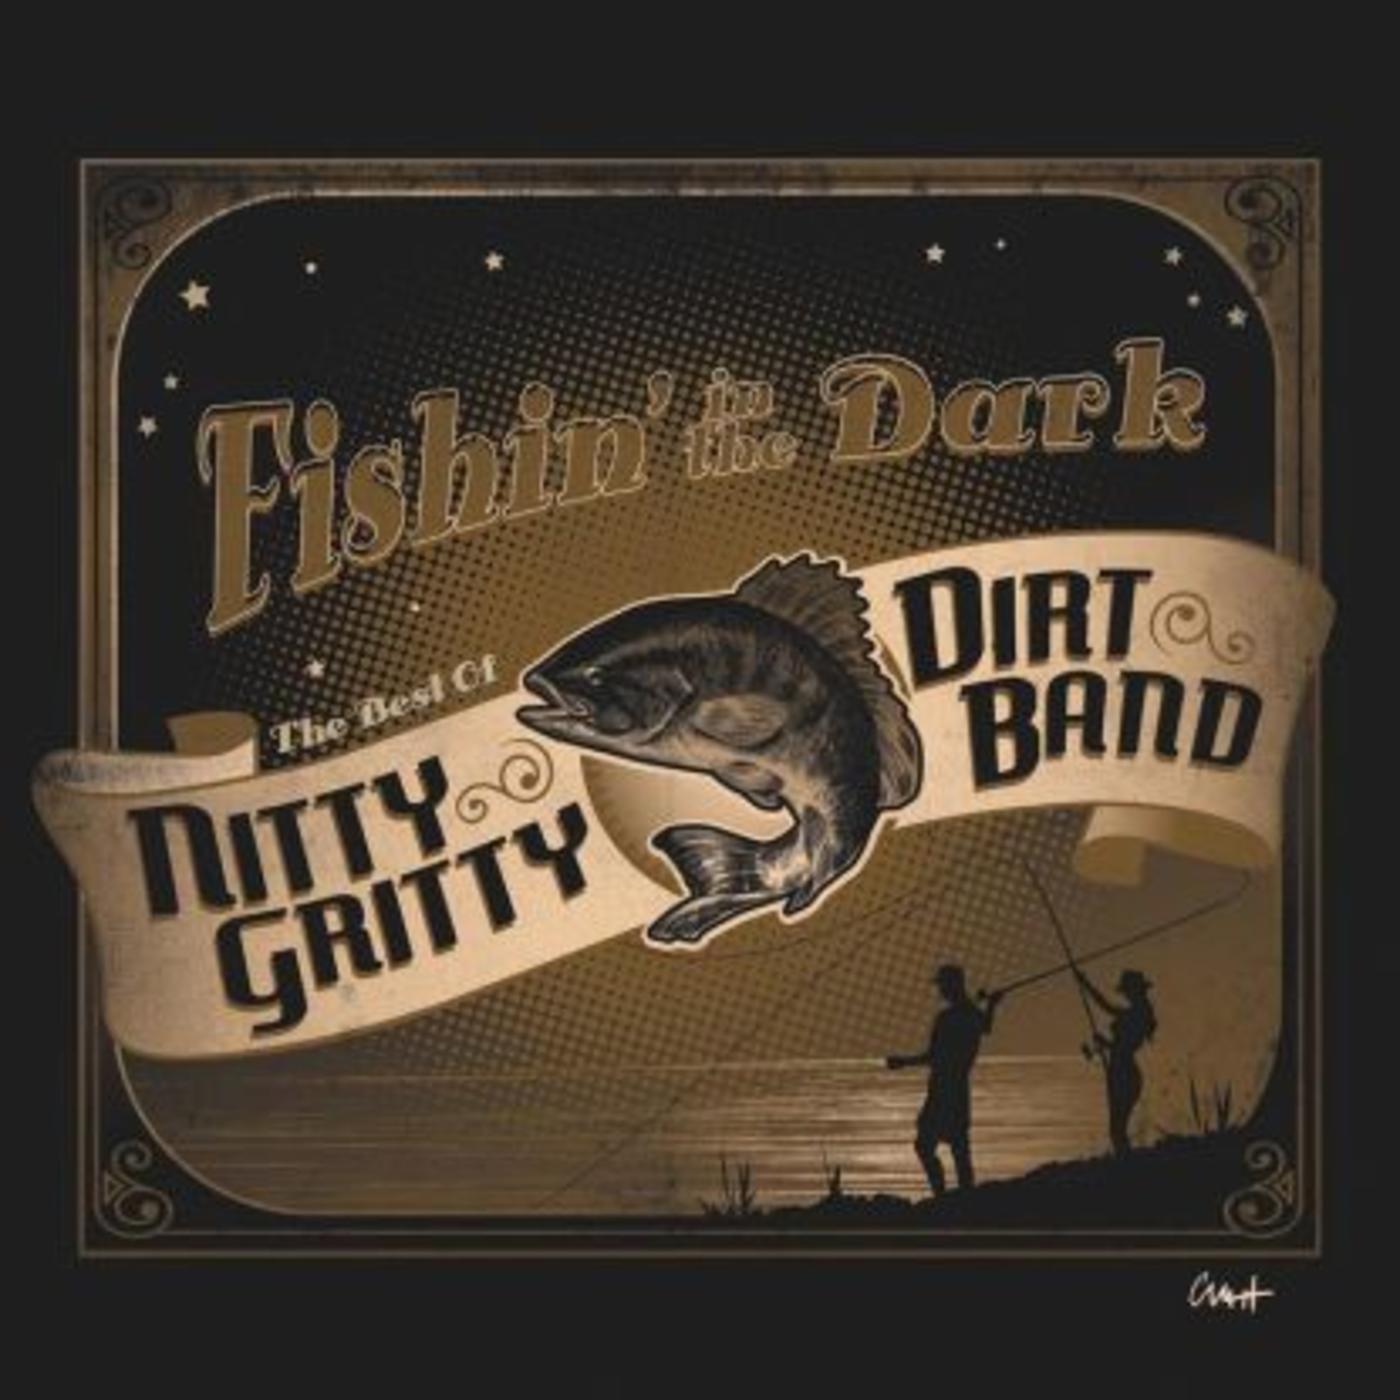 FISHIN’ IN THE DARK: THE VERY BEST OF NITTY GRITTY DIRT BAND